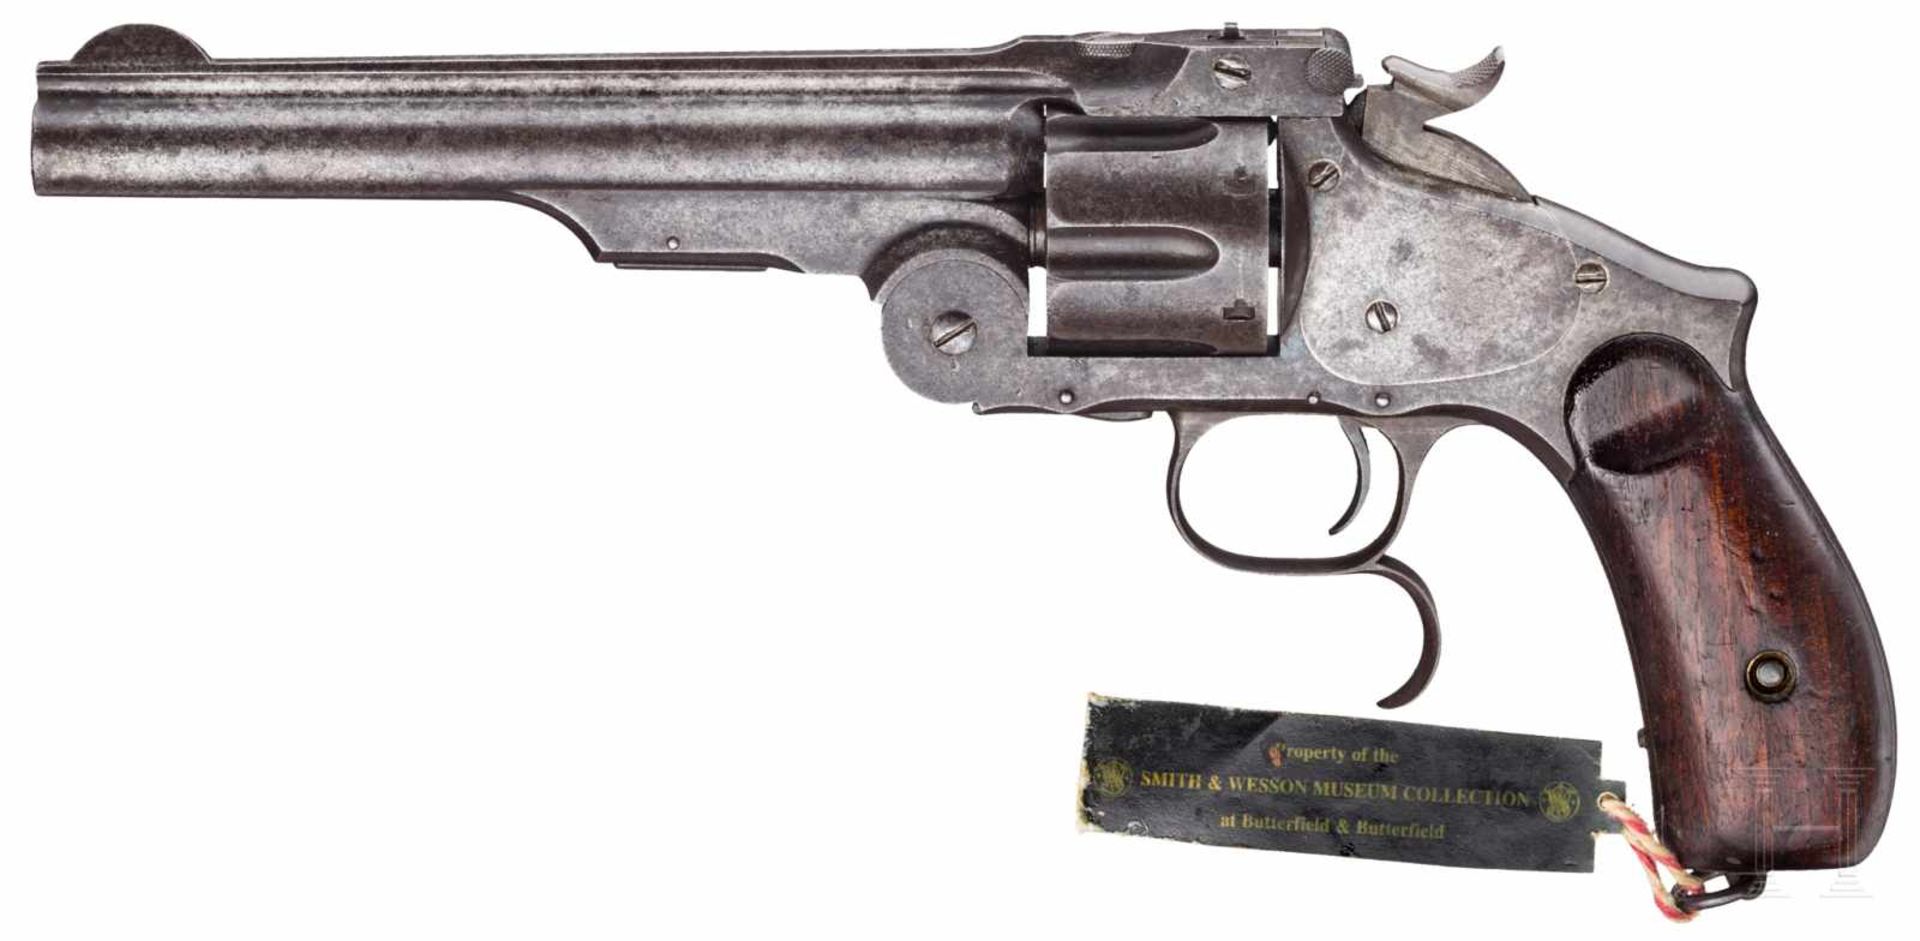 Smith & Wesson New Model No. 3, Ludwig Loewe, BerlinKal. .44 S&W Russian, Nr. 6938, Nummerngleich.